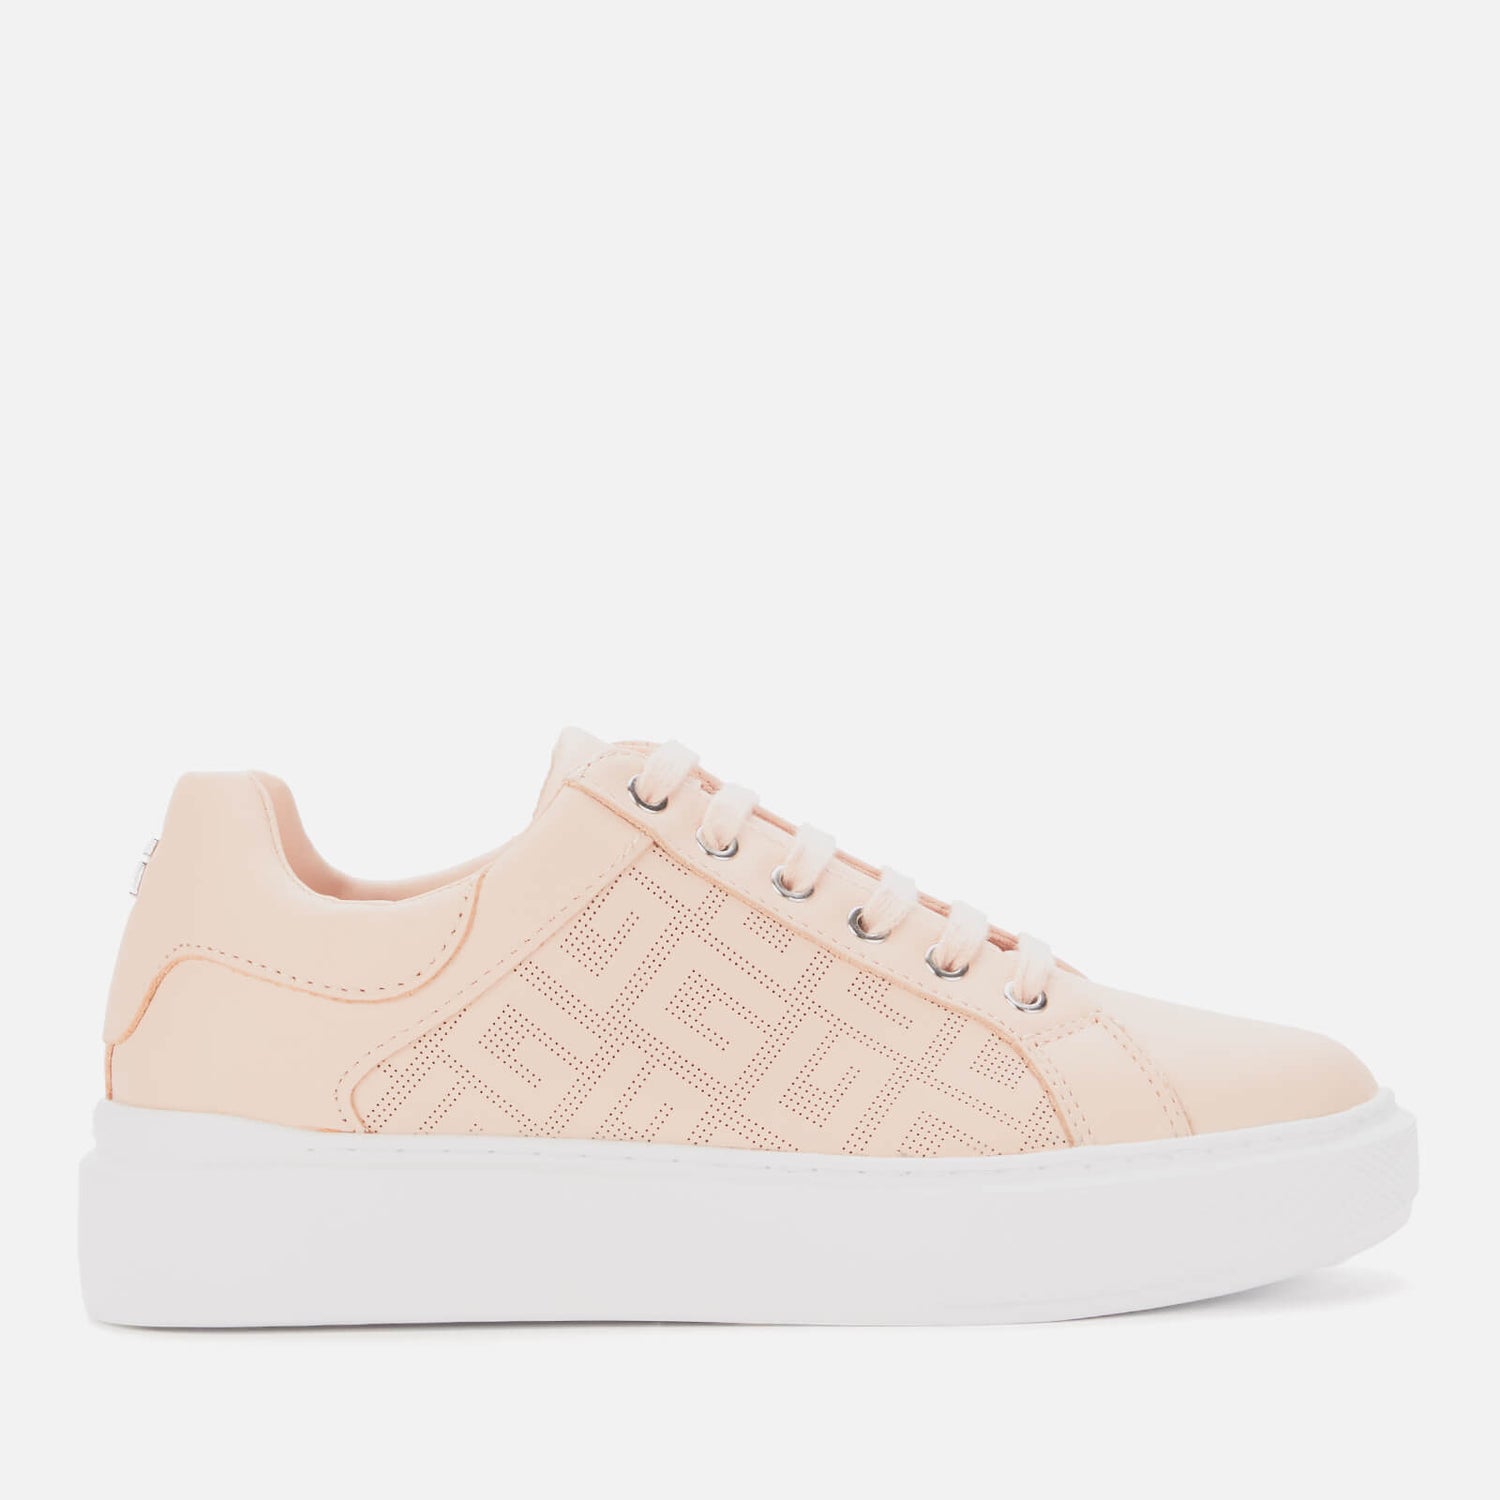 Guess Women's Ivee Leather Flatform Trainers - Pink - UK 3